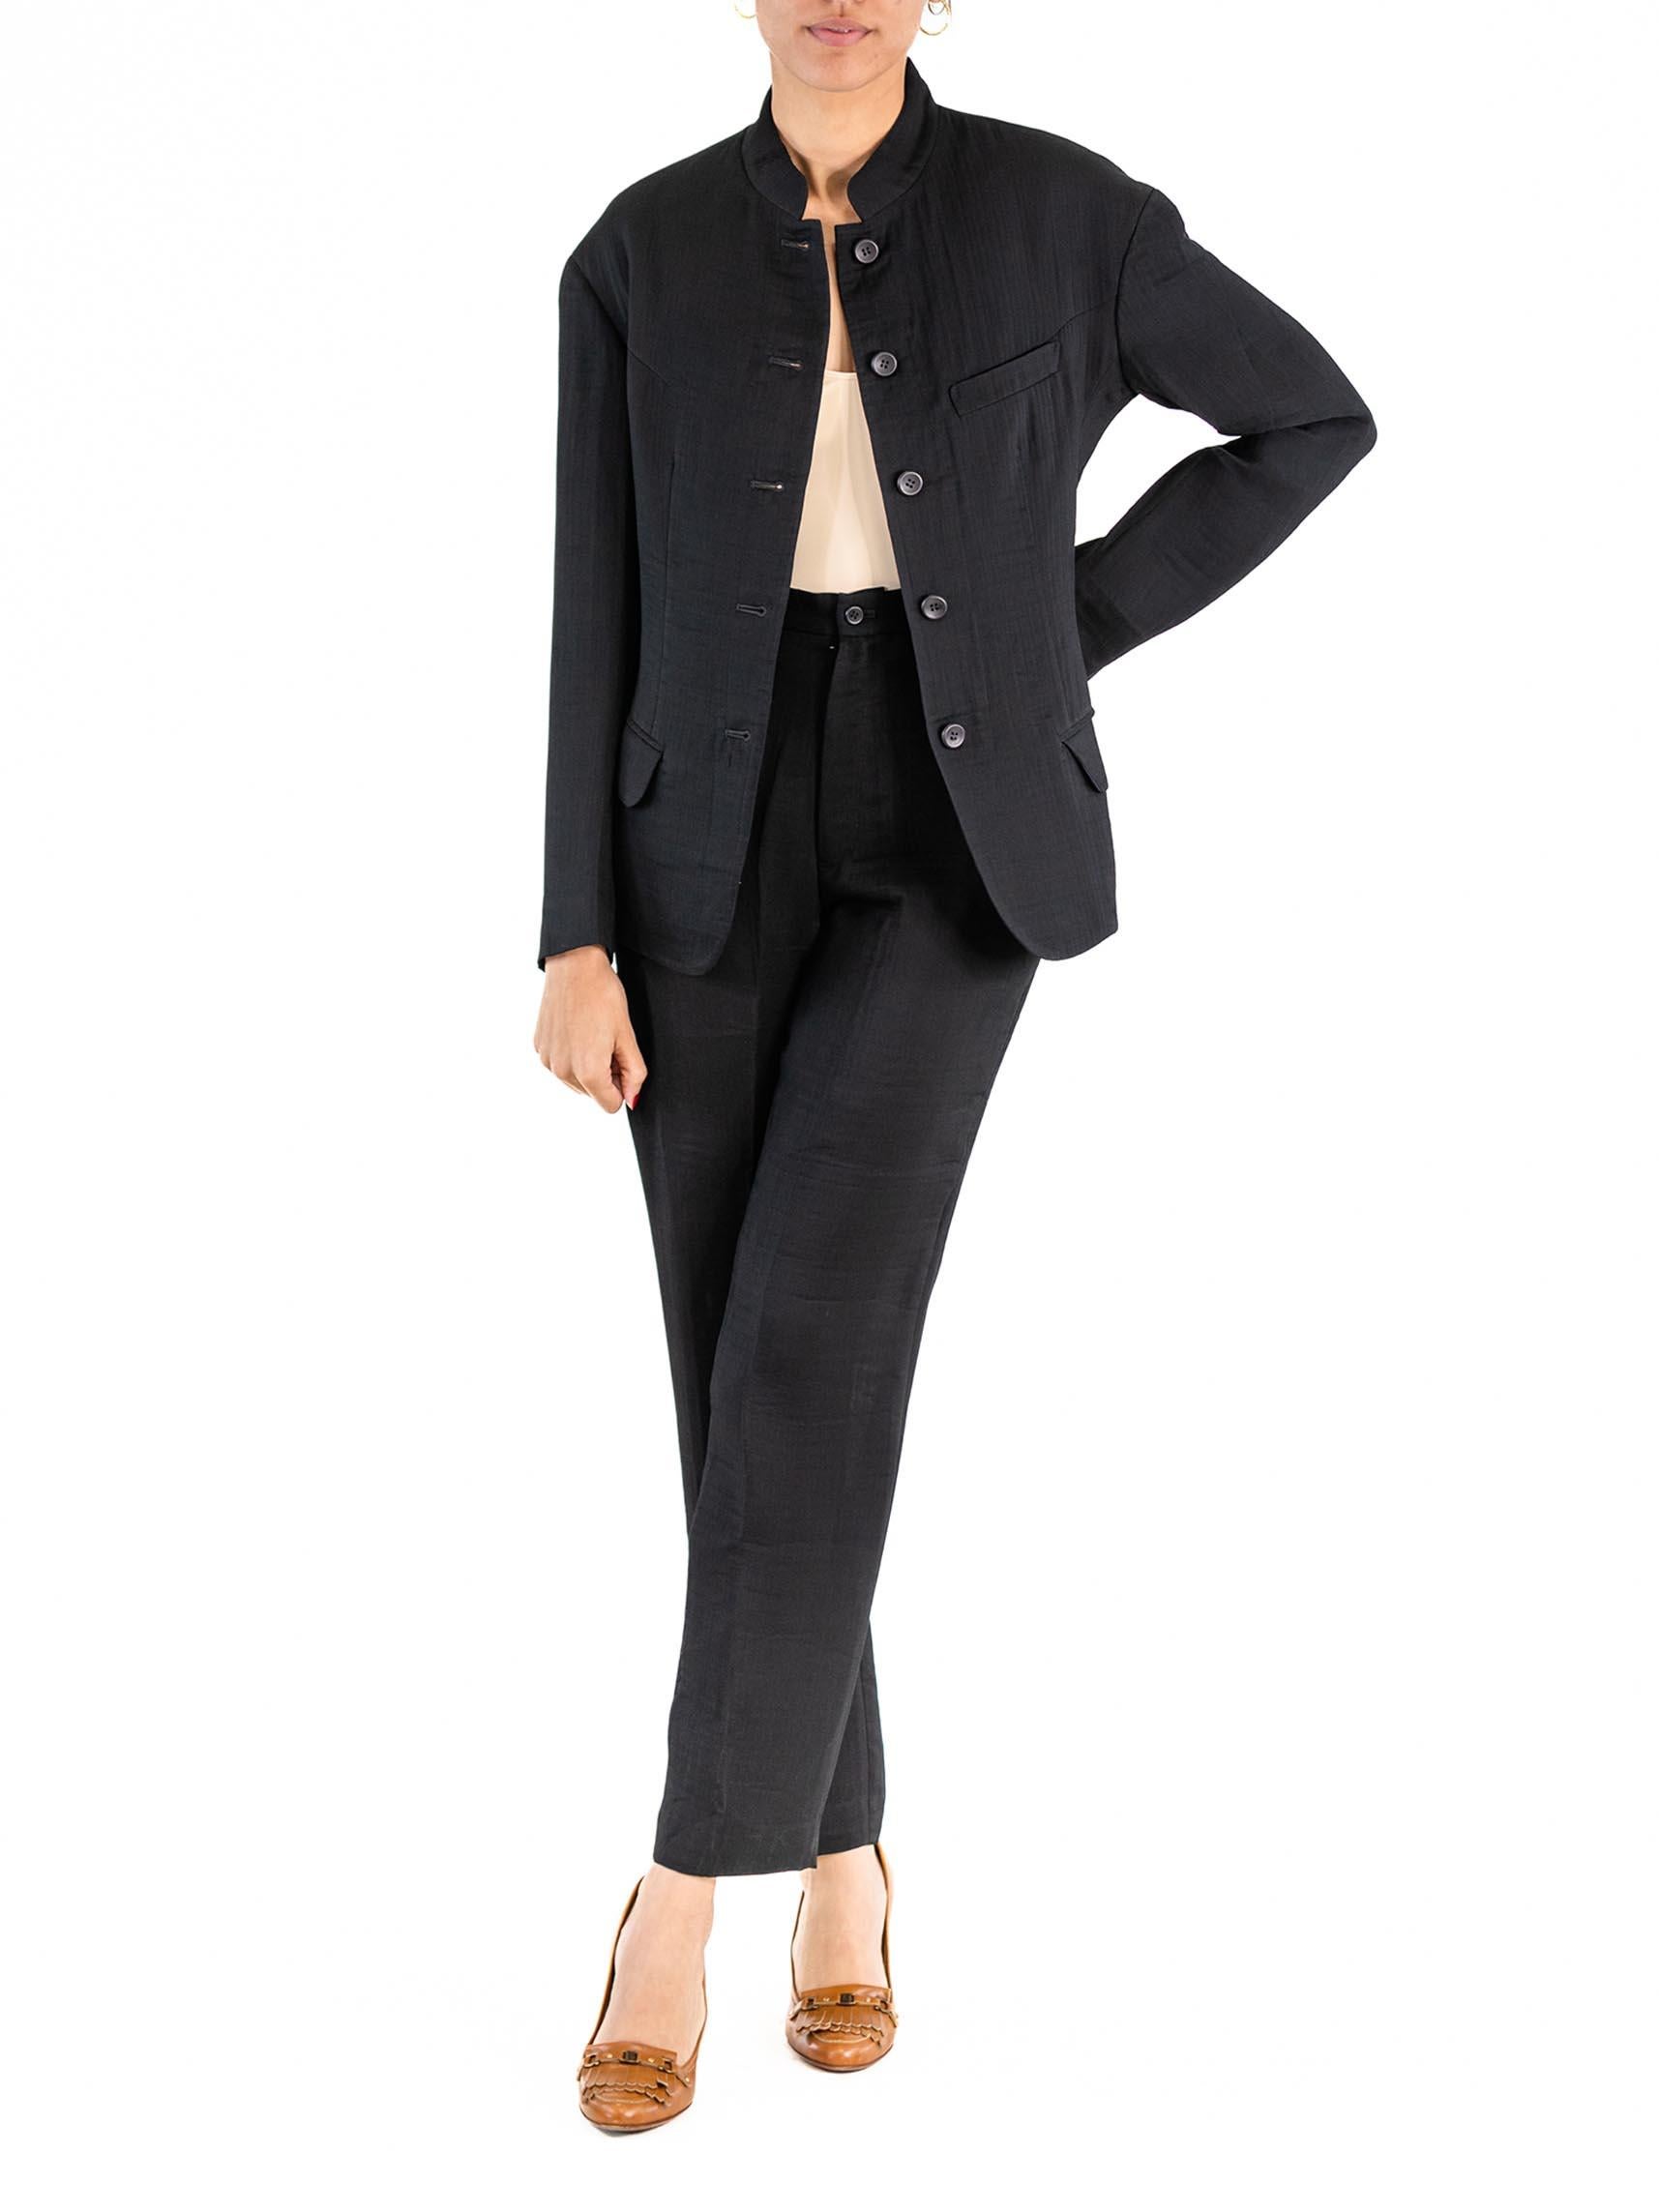 1990S ISSEY MIYAKE Black Rayon Blend Lightweight Pucker Double-Weave Pant Suit For Sale 1